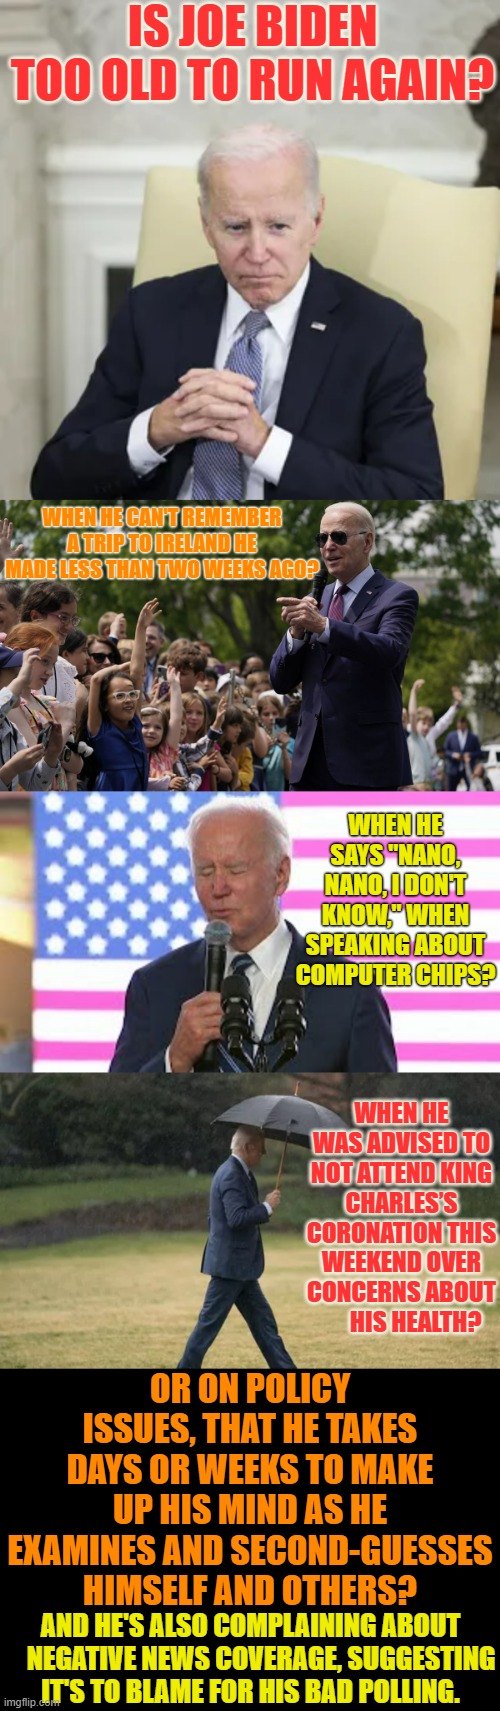 What Do You Think? | IS JOE BIDEN TOO OLD TO RUN AGAIN? WHEN HE CAN'T REMEMBER A TRIP TO IRELAND HE MADE LESS THAN TWO WEEKS AGO? WHEN HE SAYS "NANO, NANO, I DON'T KNOW," WHEN SPEAKING ABOUT COMPUTER CHIPS? WHEN HE WAS ADVISED TO NOT ATTEND KING CHARLES’S CORONATION THIS WEEKEND OVER CONCERNS ABOUT       HIS HEALTH? OR ON POLICY ISSUES, THAT HE TAKES DAYS OR WEEKS TO MAKE UP HIS MIND AS HE EXAMINES AND SECOND-GUESSES HIMSELF AND OTHERS? AND HE'S ALSO COMPLAINING ABOUT     NEGATIVE NEWS COVERAGE, SUGGESTING IT'S TO BLAME FOR HIS BAD POLLING. | image tagged in memes,politics,joe biden,too old,run,again | made w/ Imgflip meme maker